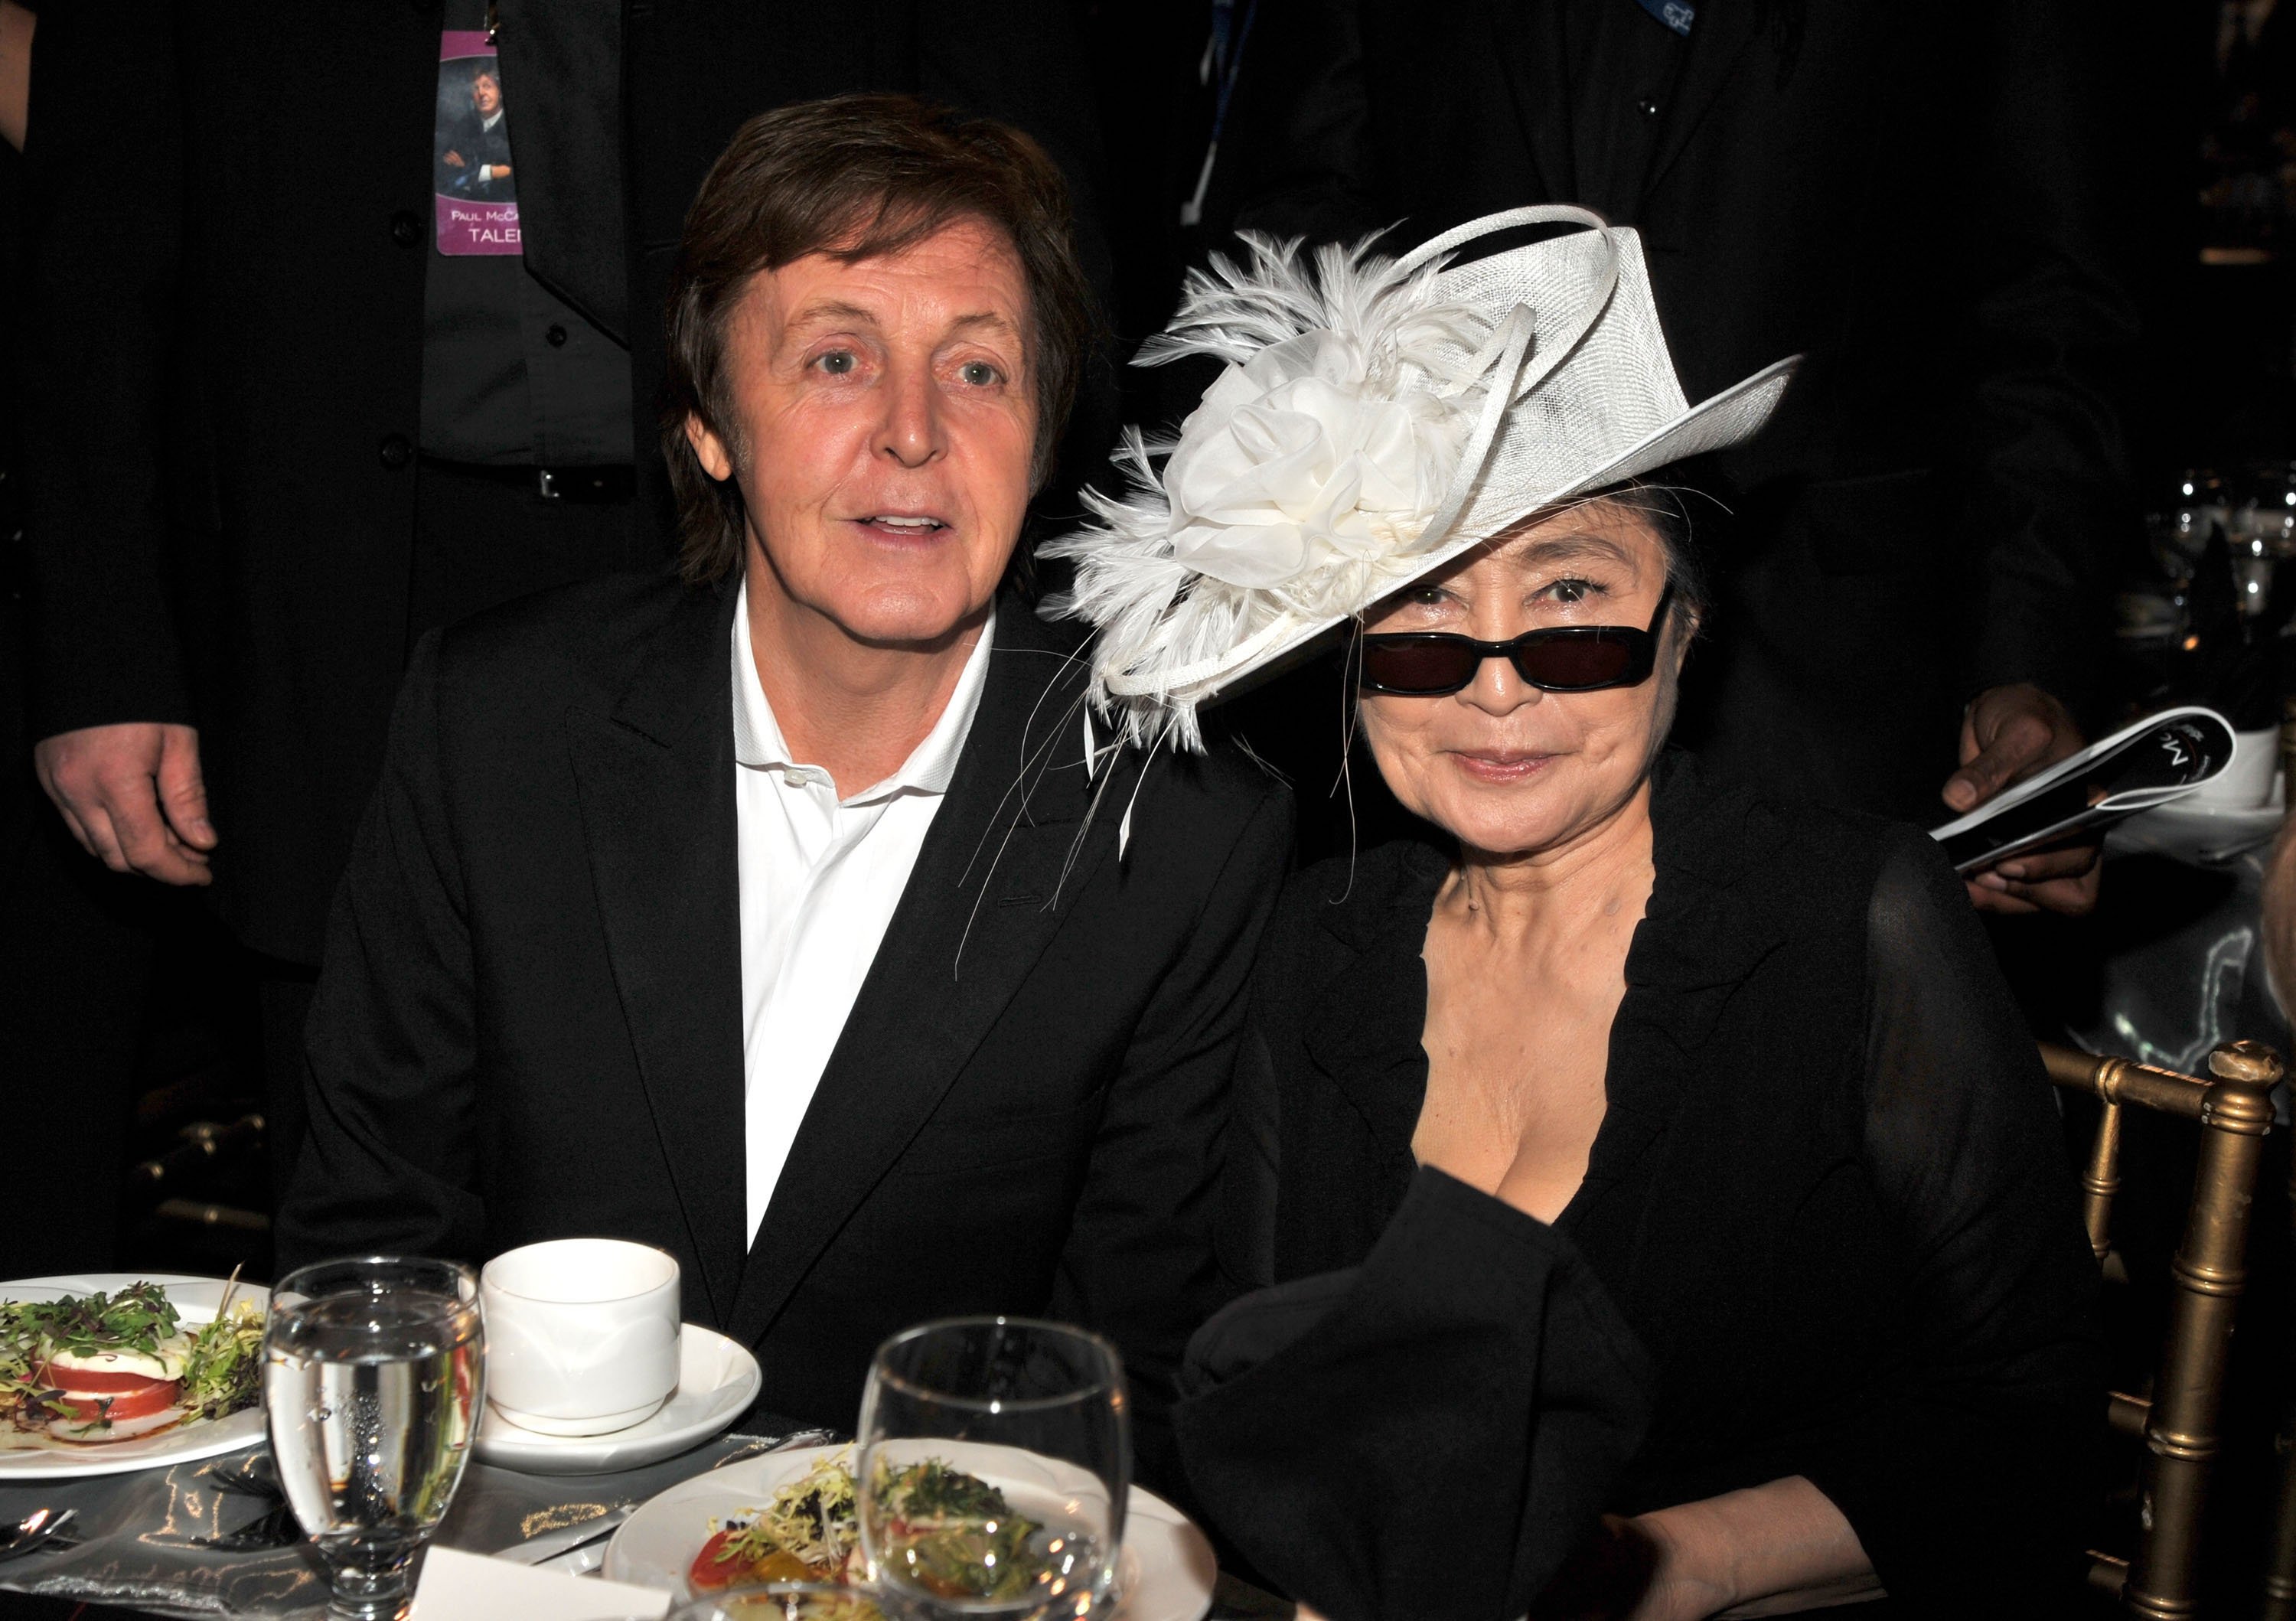 Paul McCartney and Yoko Ono attend the 2012 MusiCares Person of the Year Gala honoring McCartney in Los Angeles